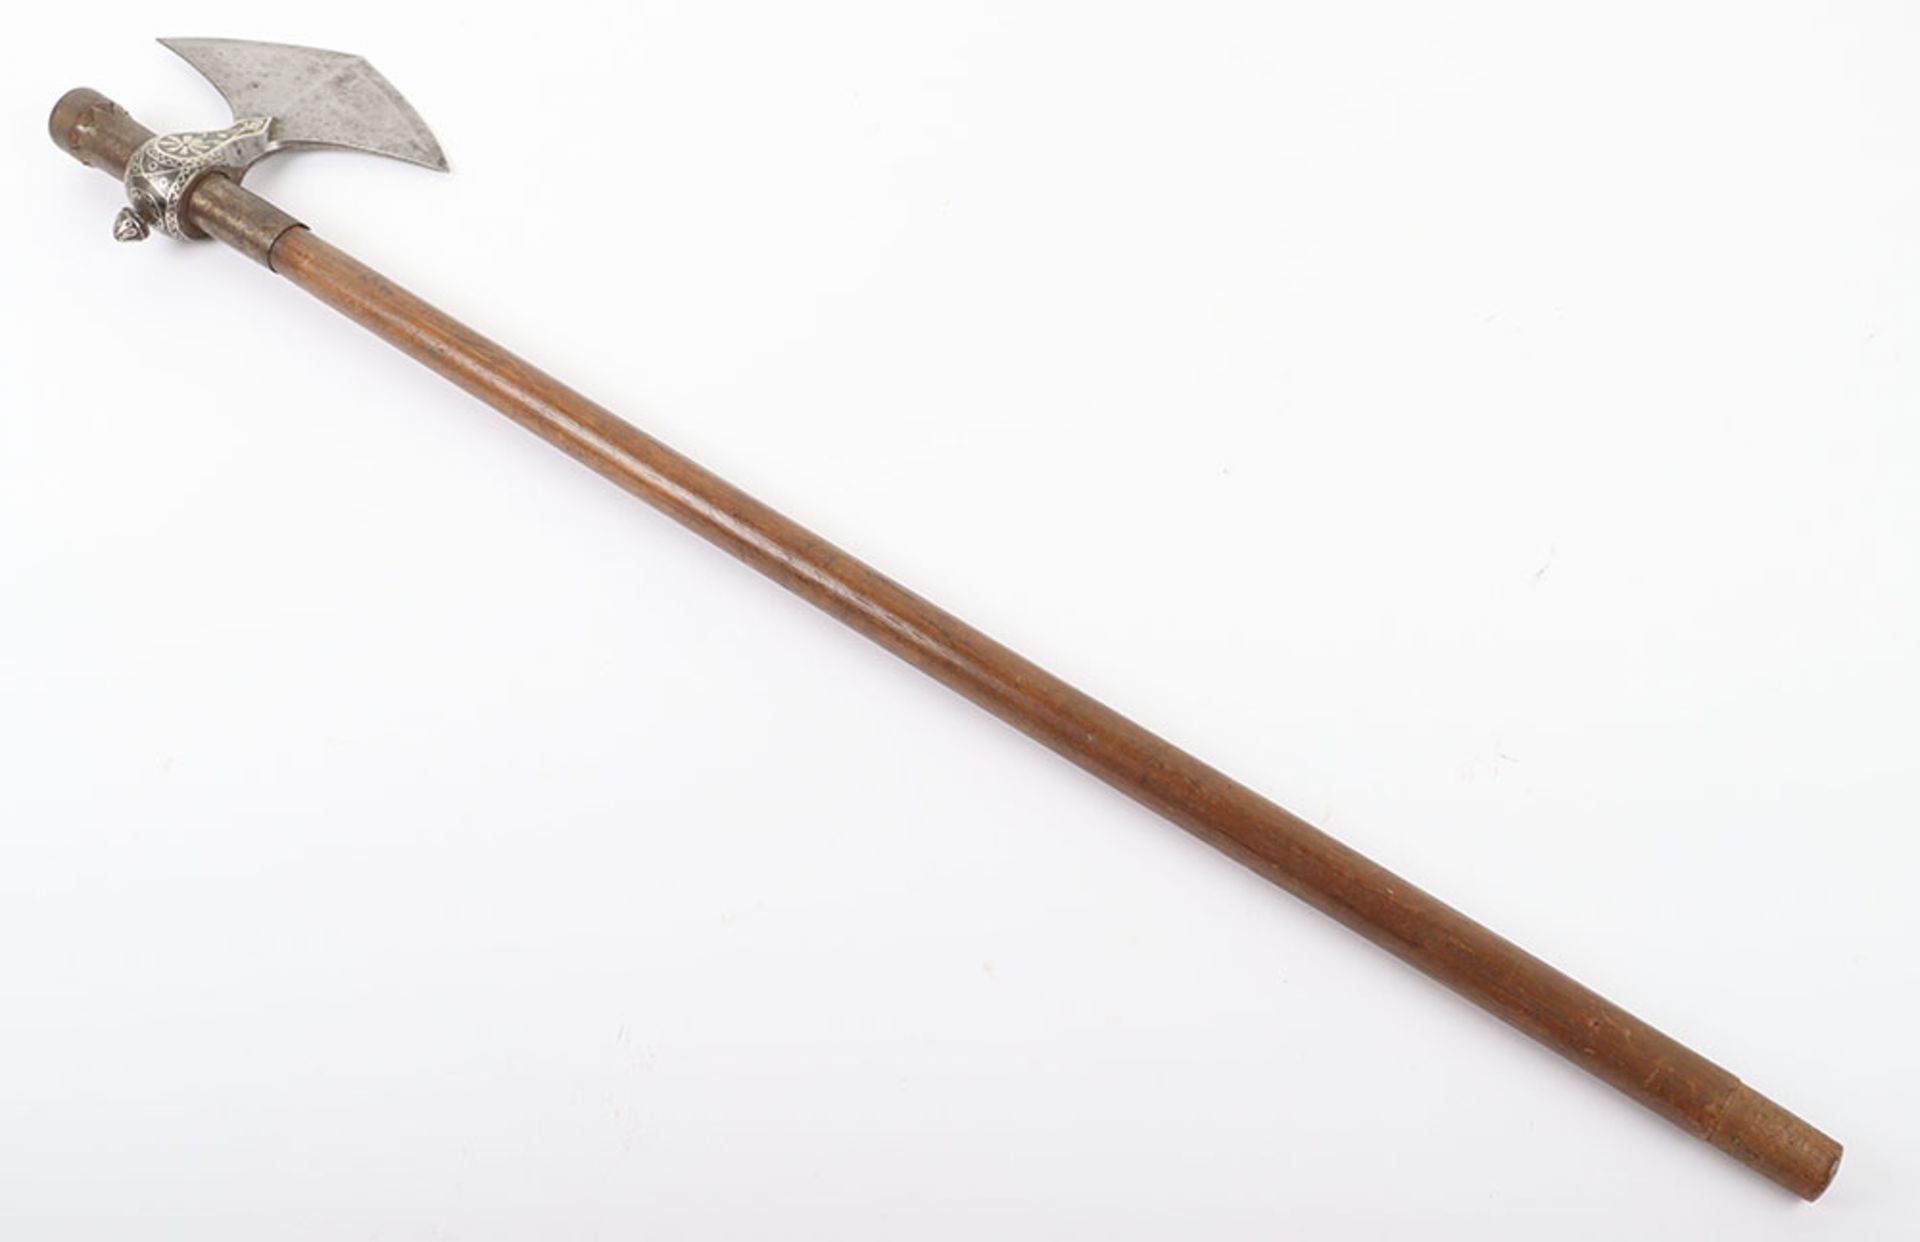 Indian Axe from Chota Nagpur, 19th Century - Image 9 of 10